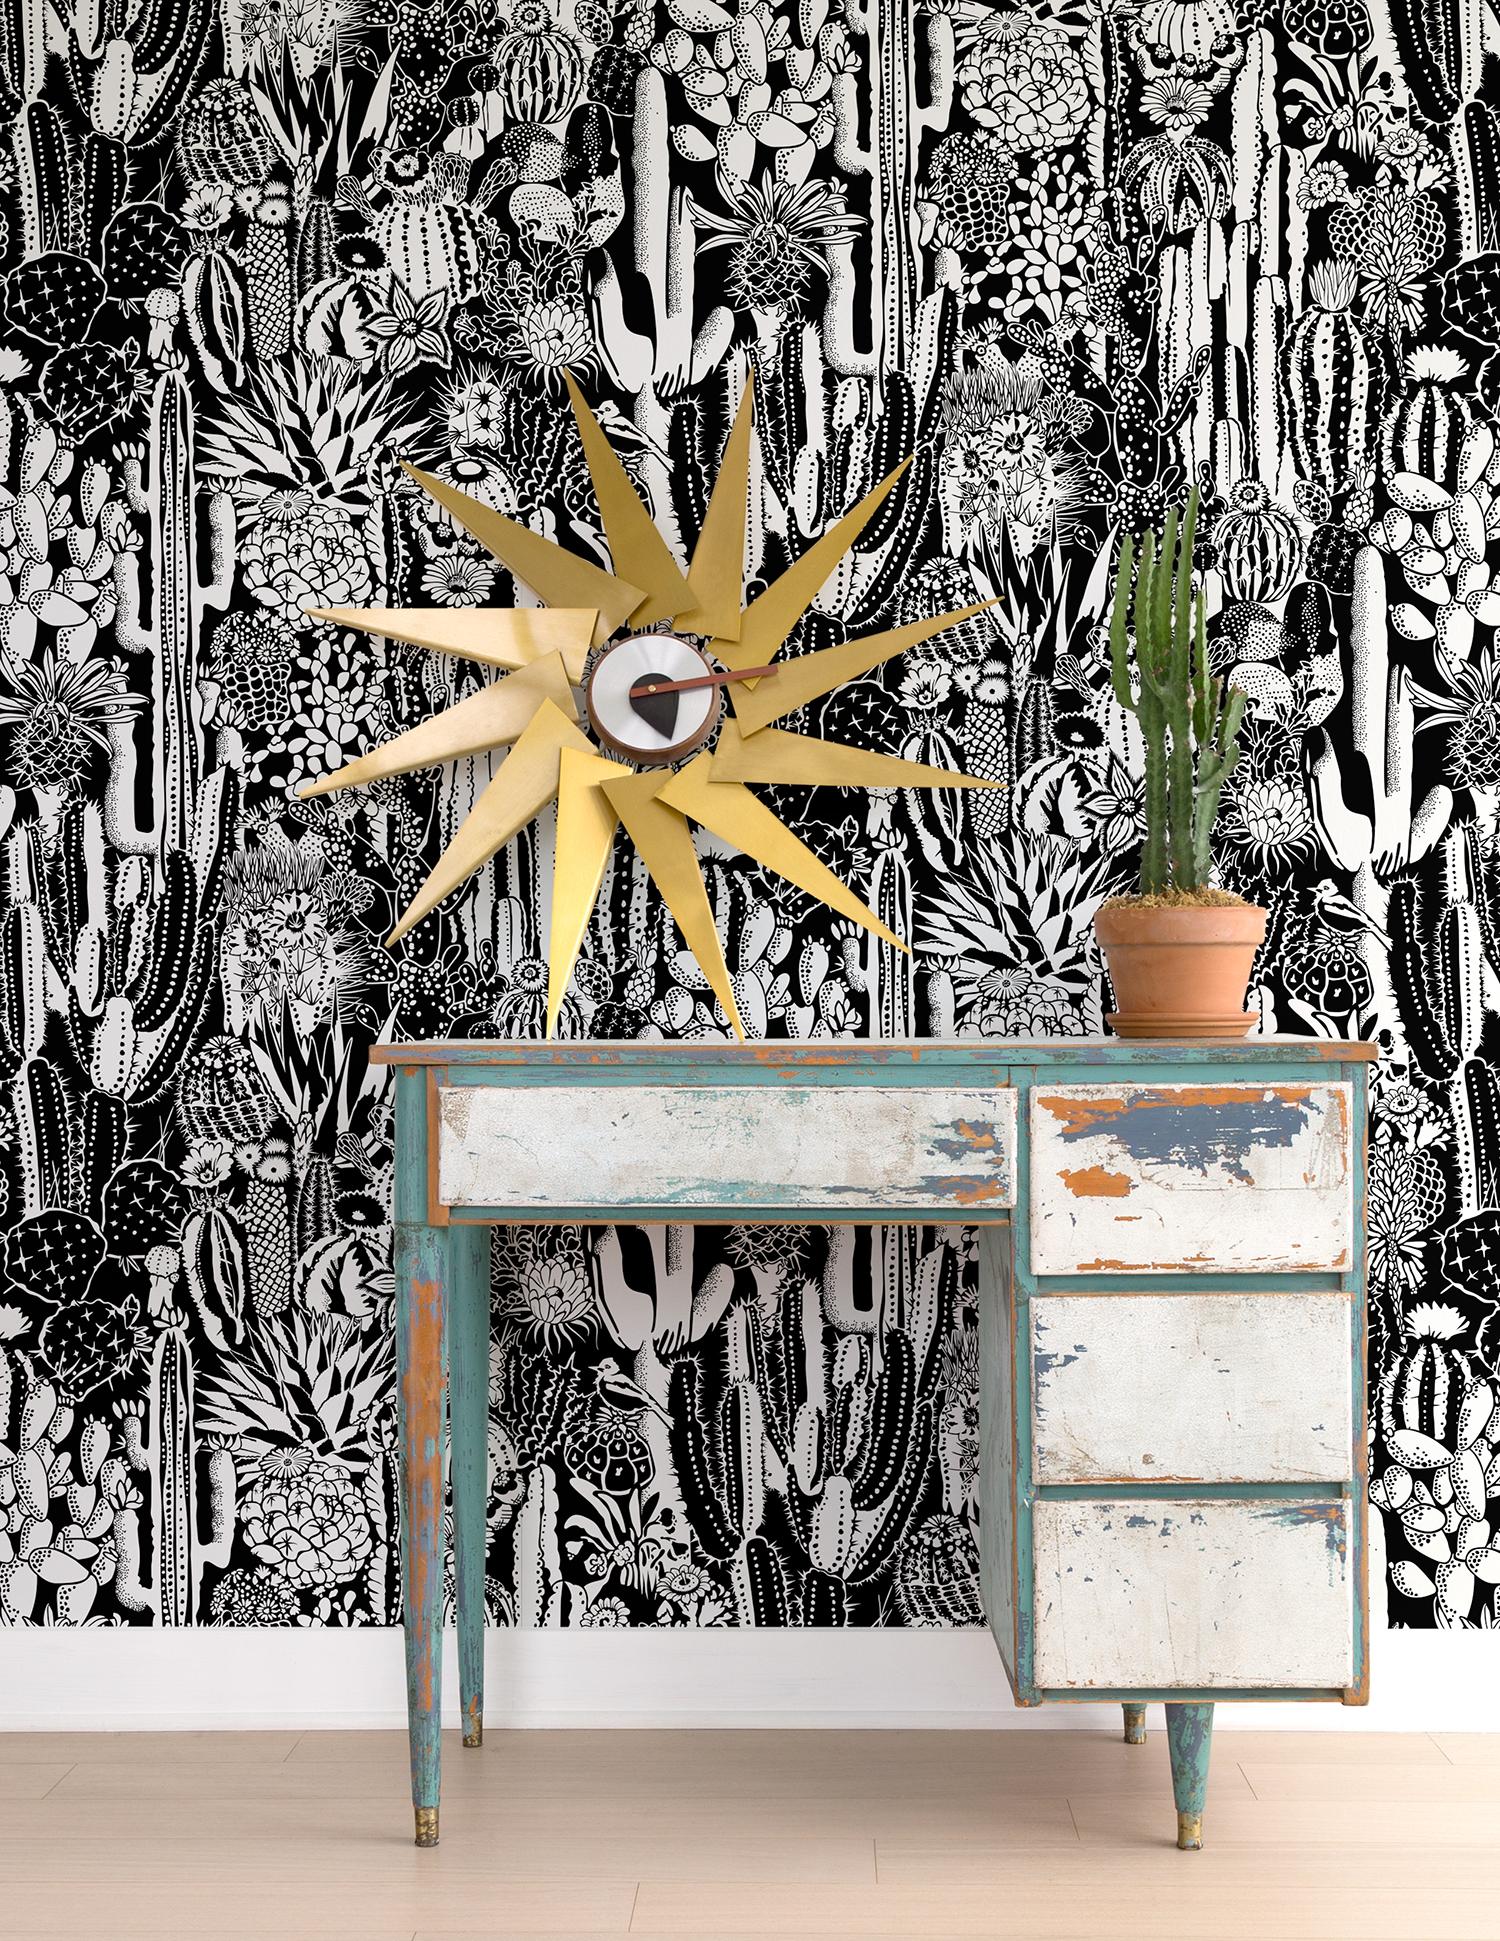 Give your space a taste of the Southwest with this graphic, oversized cactus repeat! This pattern combines saguaros, aloe, agave, peyote, prickly pear, San Pedros and more—the perfect way to bring the desert into your space without getting